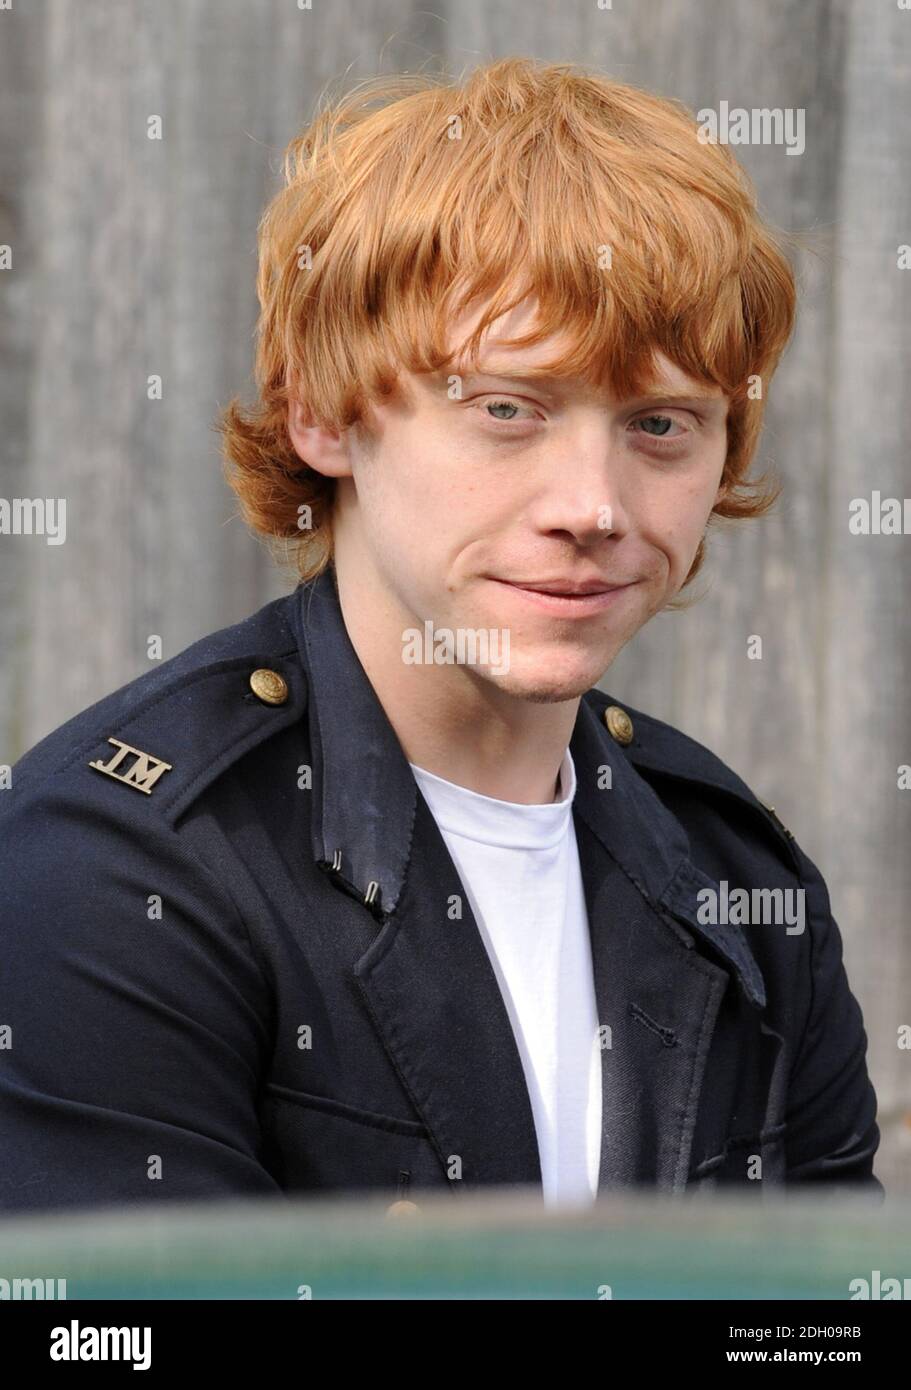 Rupert Grint at the Memorial Service for Robert Knox, 18, who played Marcus Belby in the forthcoming film Harry Potter and the Half Blood Prince, and was fatally injured outside a bar in Sidcup last month. Held at St John the Evangelist church in Sidcup, Kent. Stock Photo